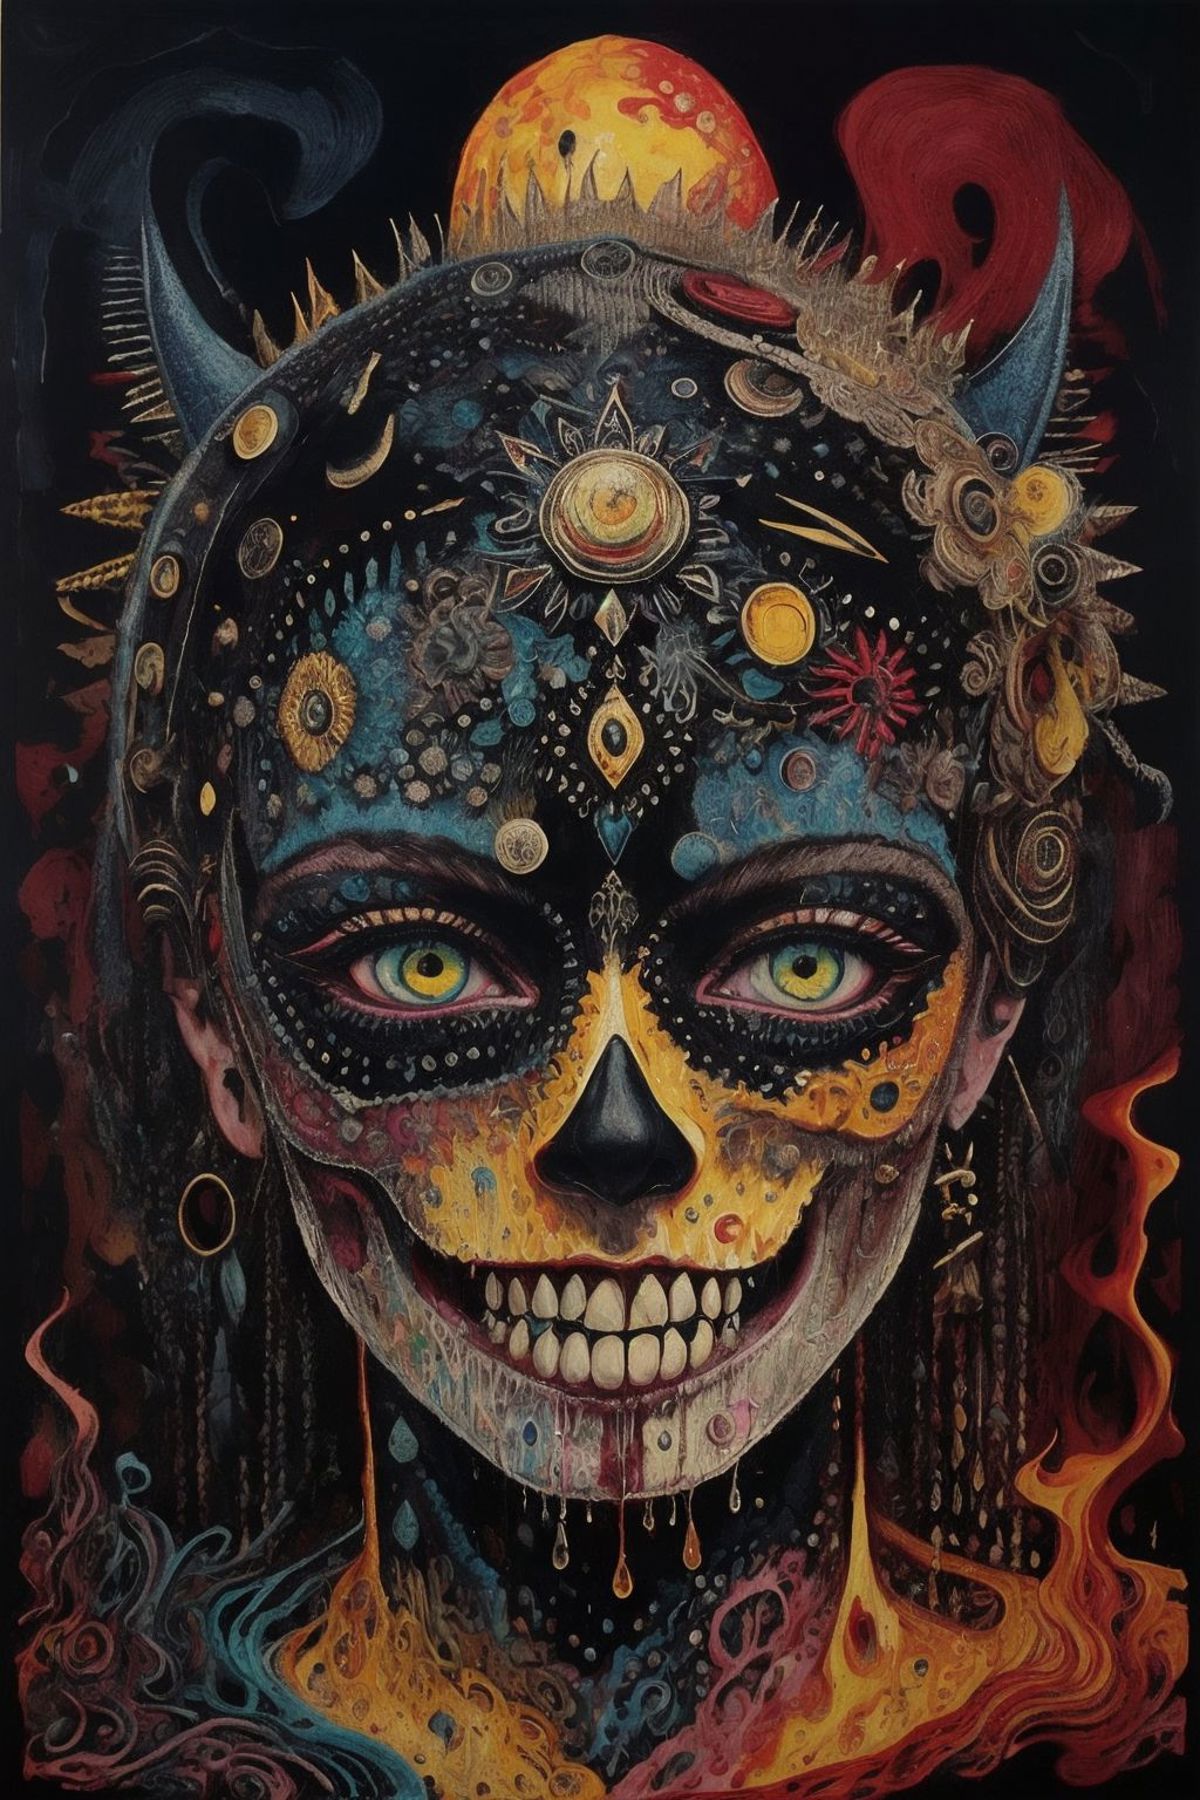 A colorful painting of a woman's head with a skull face, decorated with various jewels and adornments.